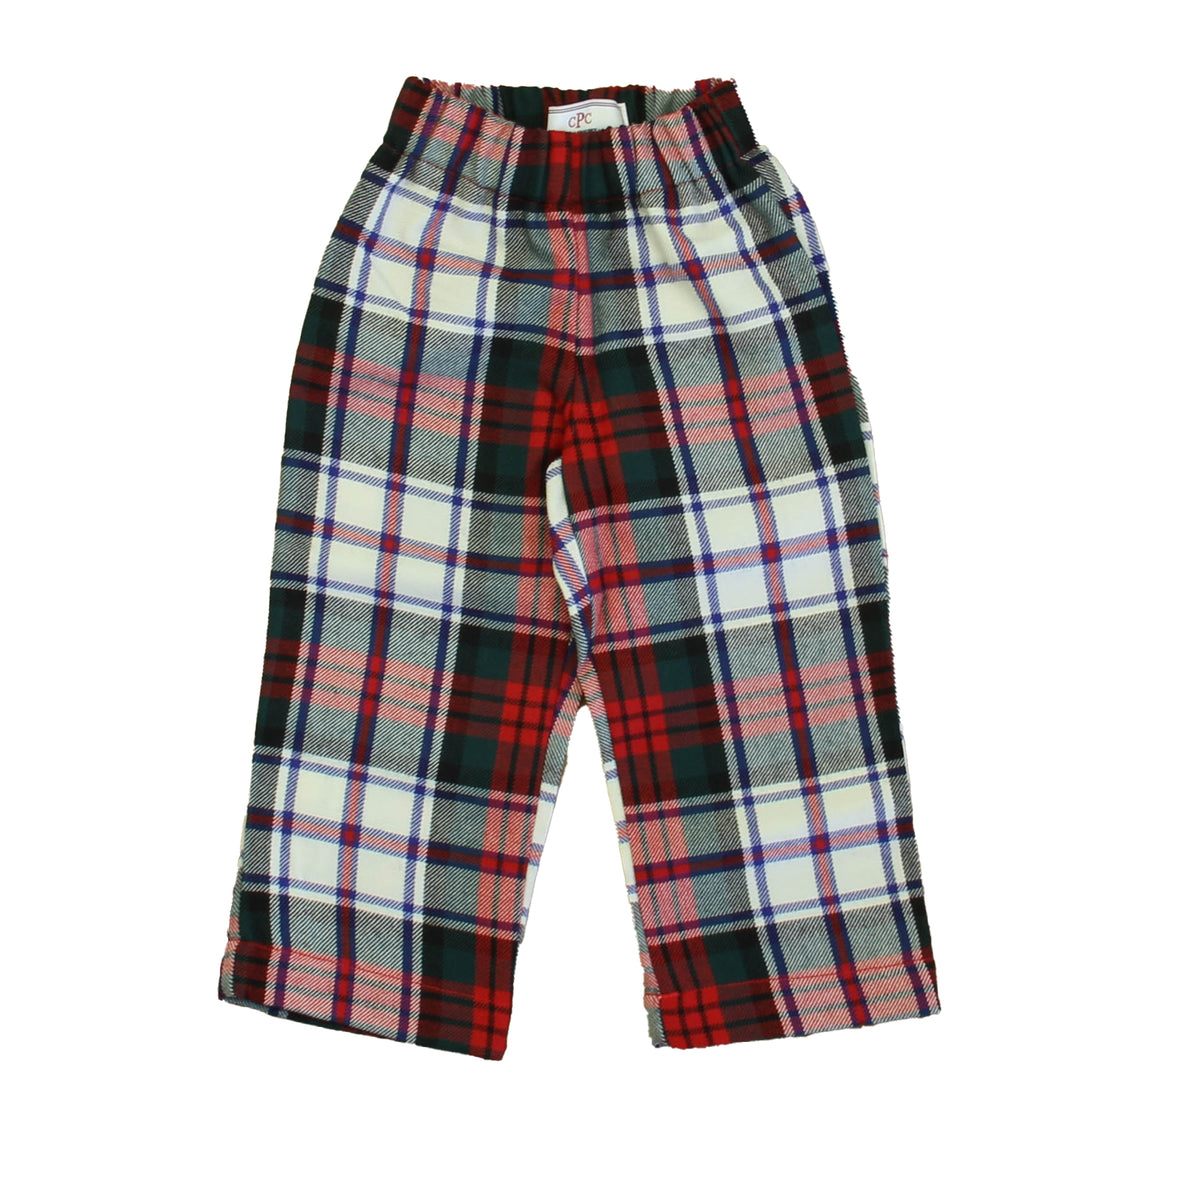 New with Tags: Macduff Plaid Pants size: 9-12 Months -- FINAL SALE